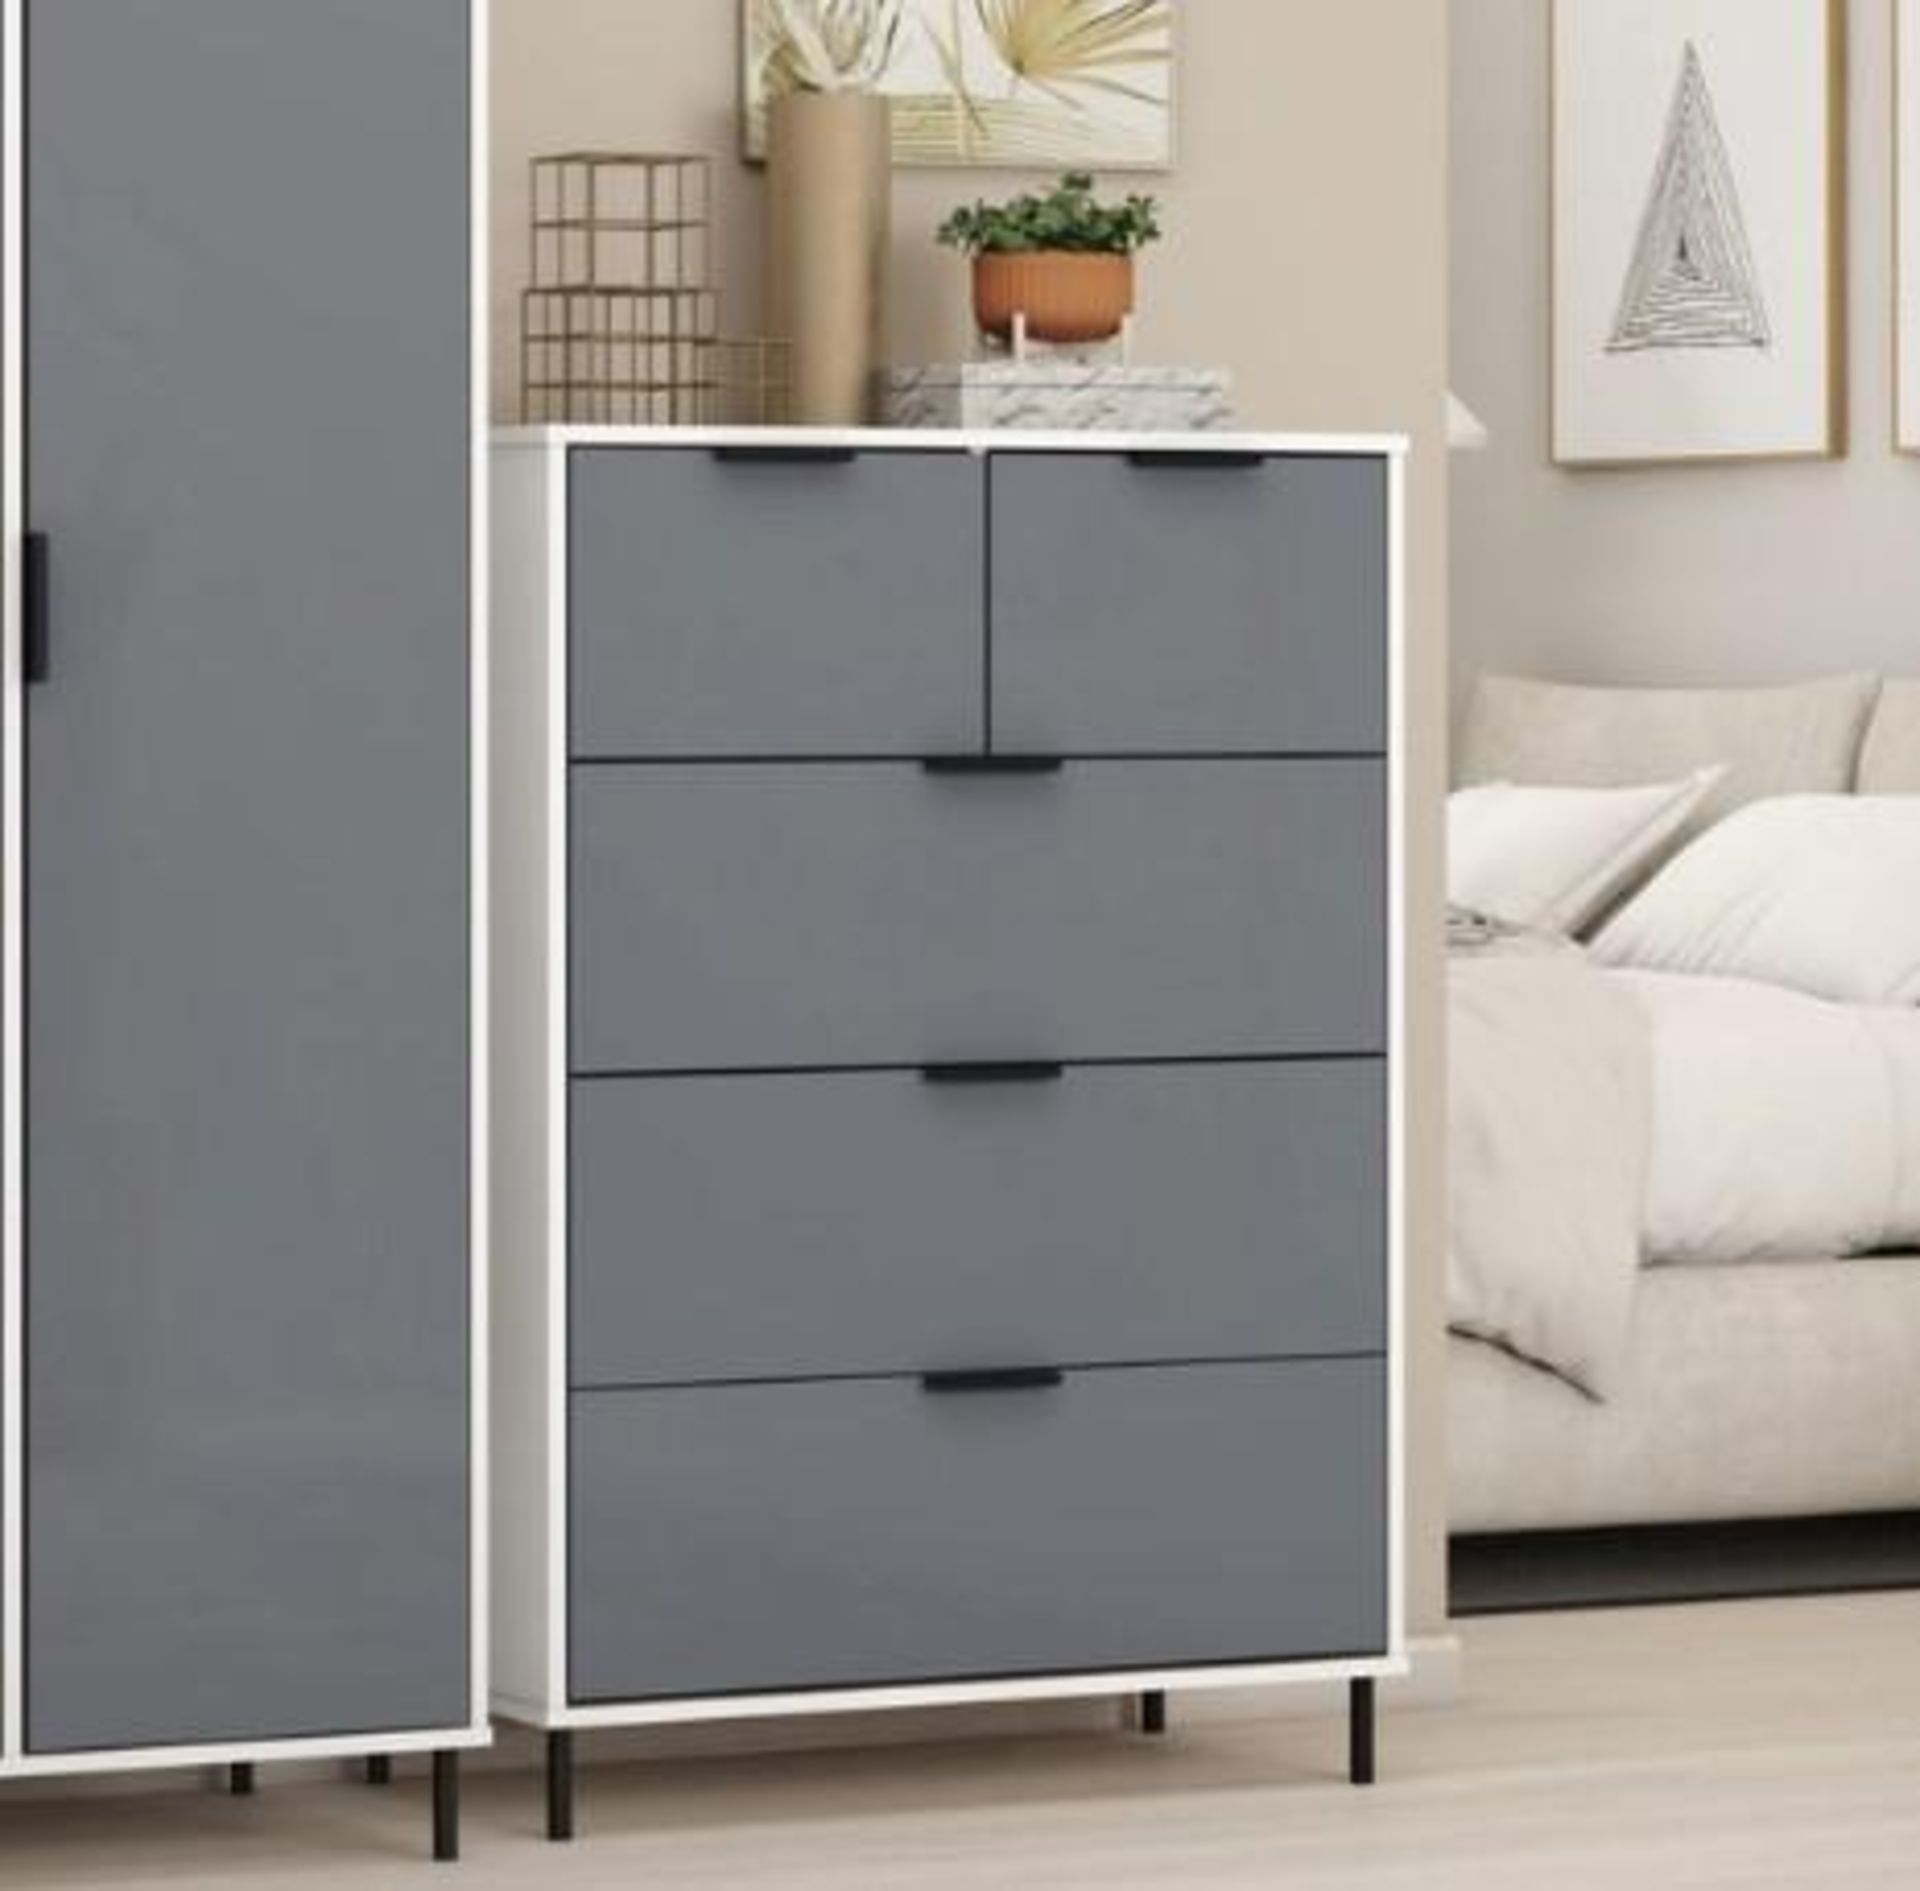 *BRAND NEW* Barcelona grey and white gloss 3 + 2 drawer chest flat packed - Image 2 of 2